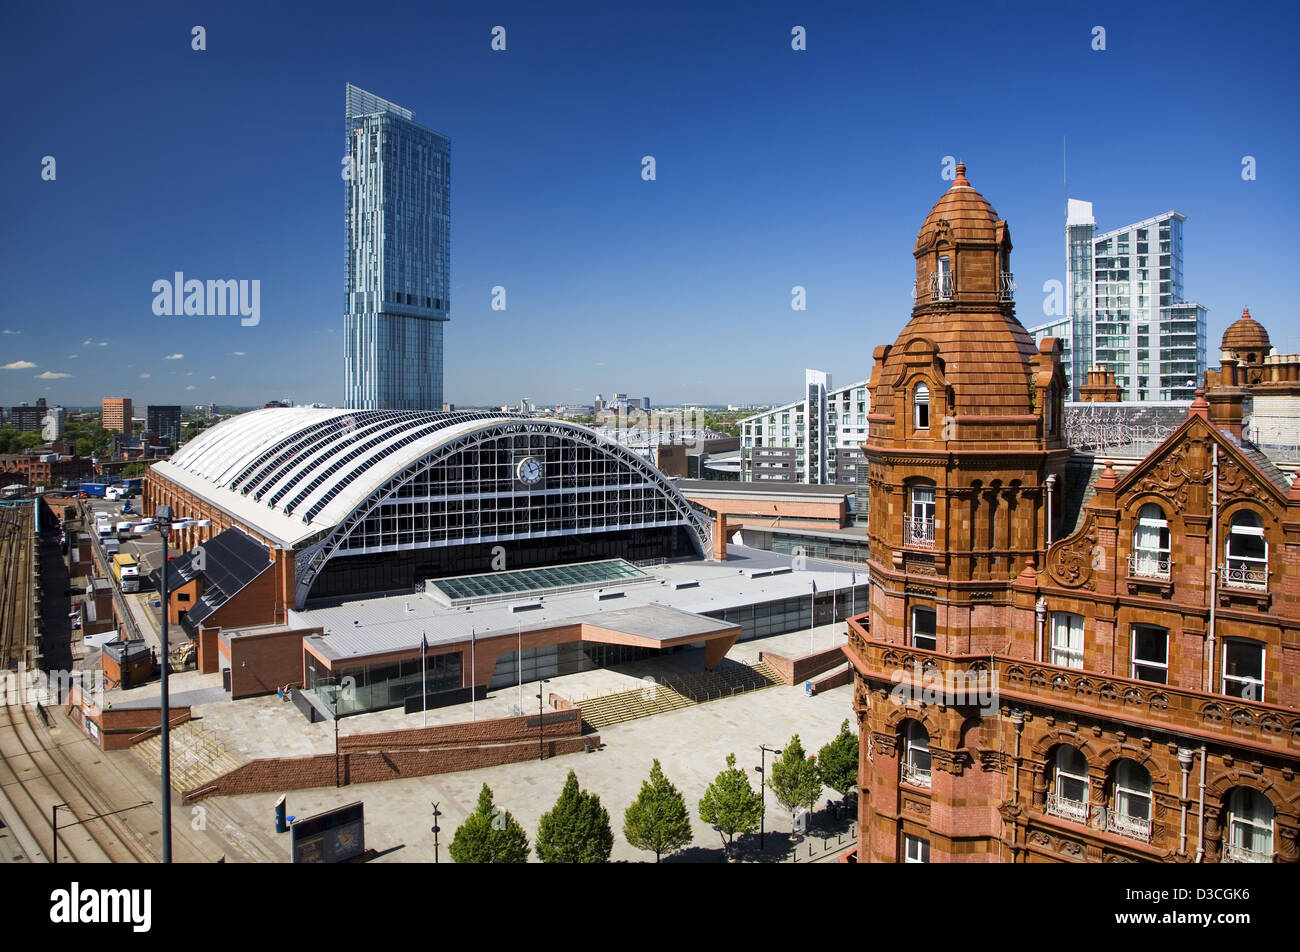 View Of Manchester Central Convention Centre And Beetham Tower With Midland Hotel In Foreground, Manchester, Uk, Europe Stock Photo